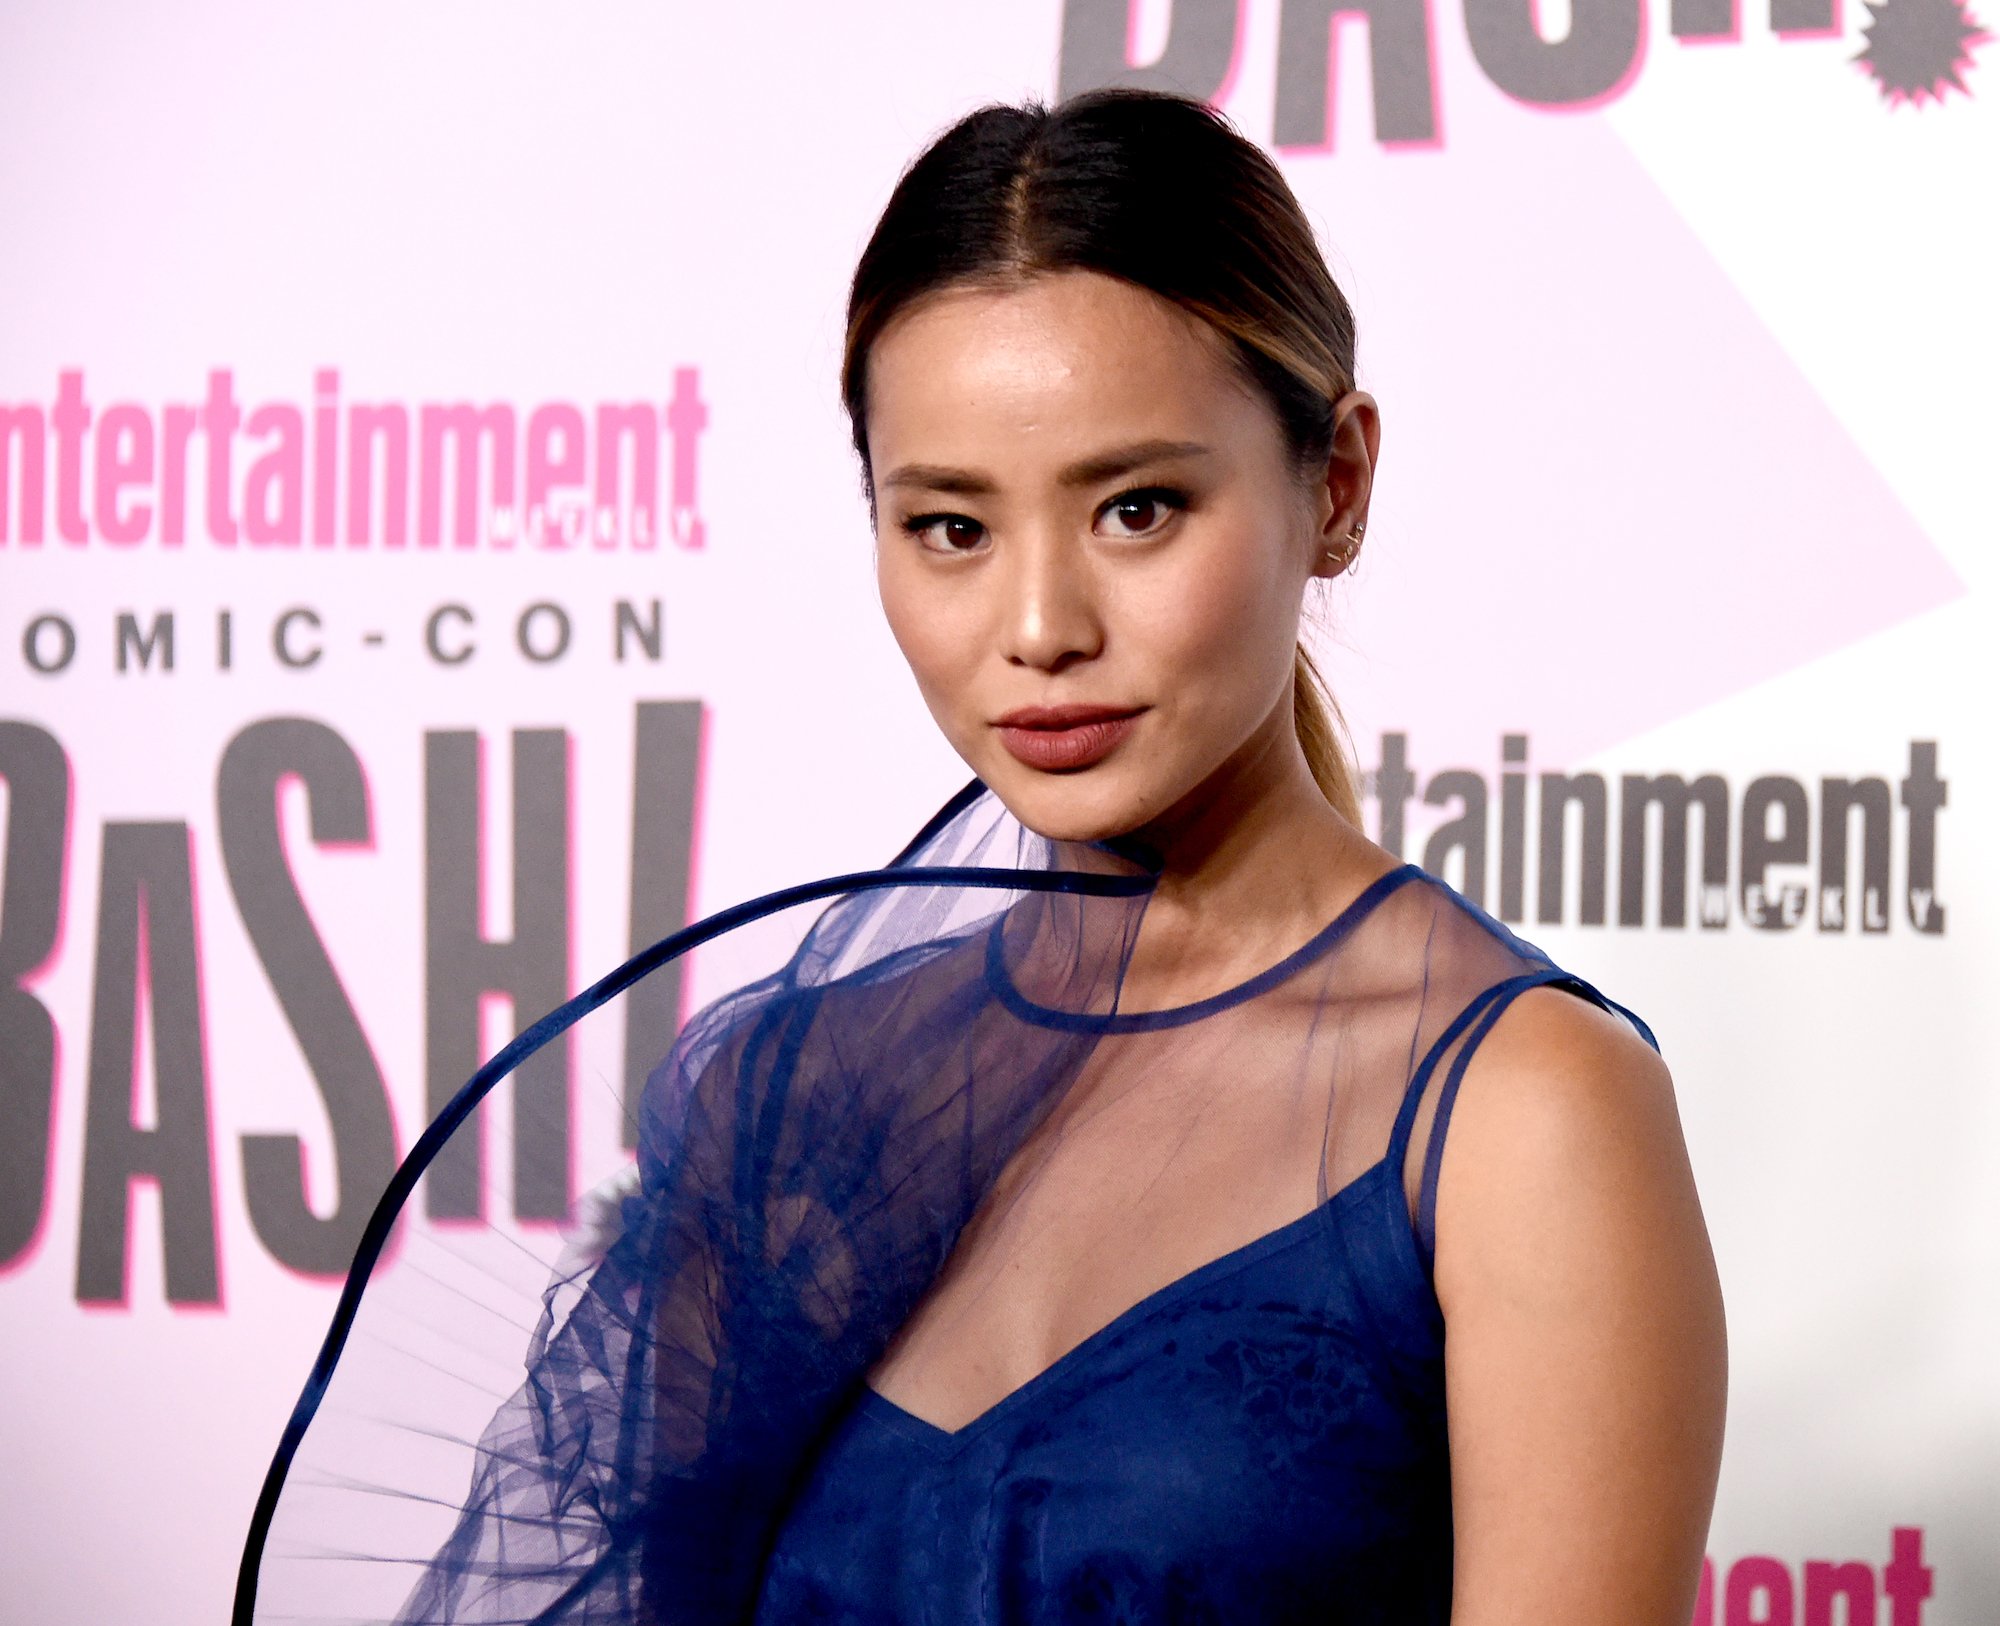 True crime podcaster actor Jamie Chung on the EW Comic-Con red carpet